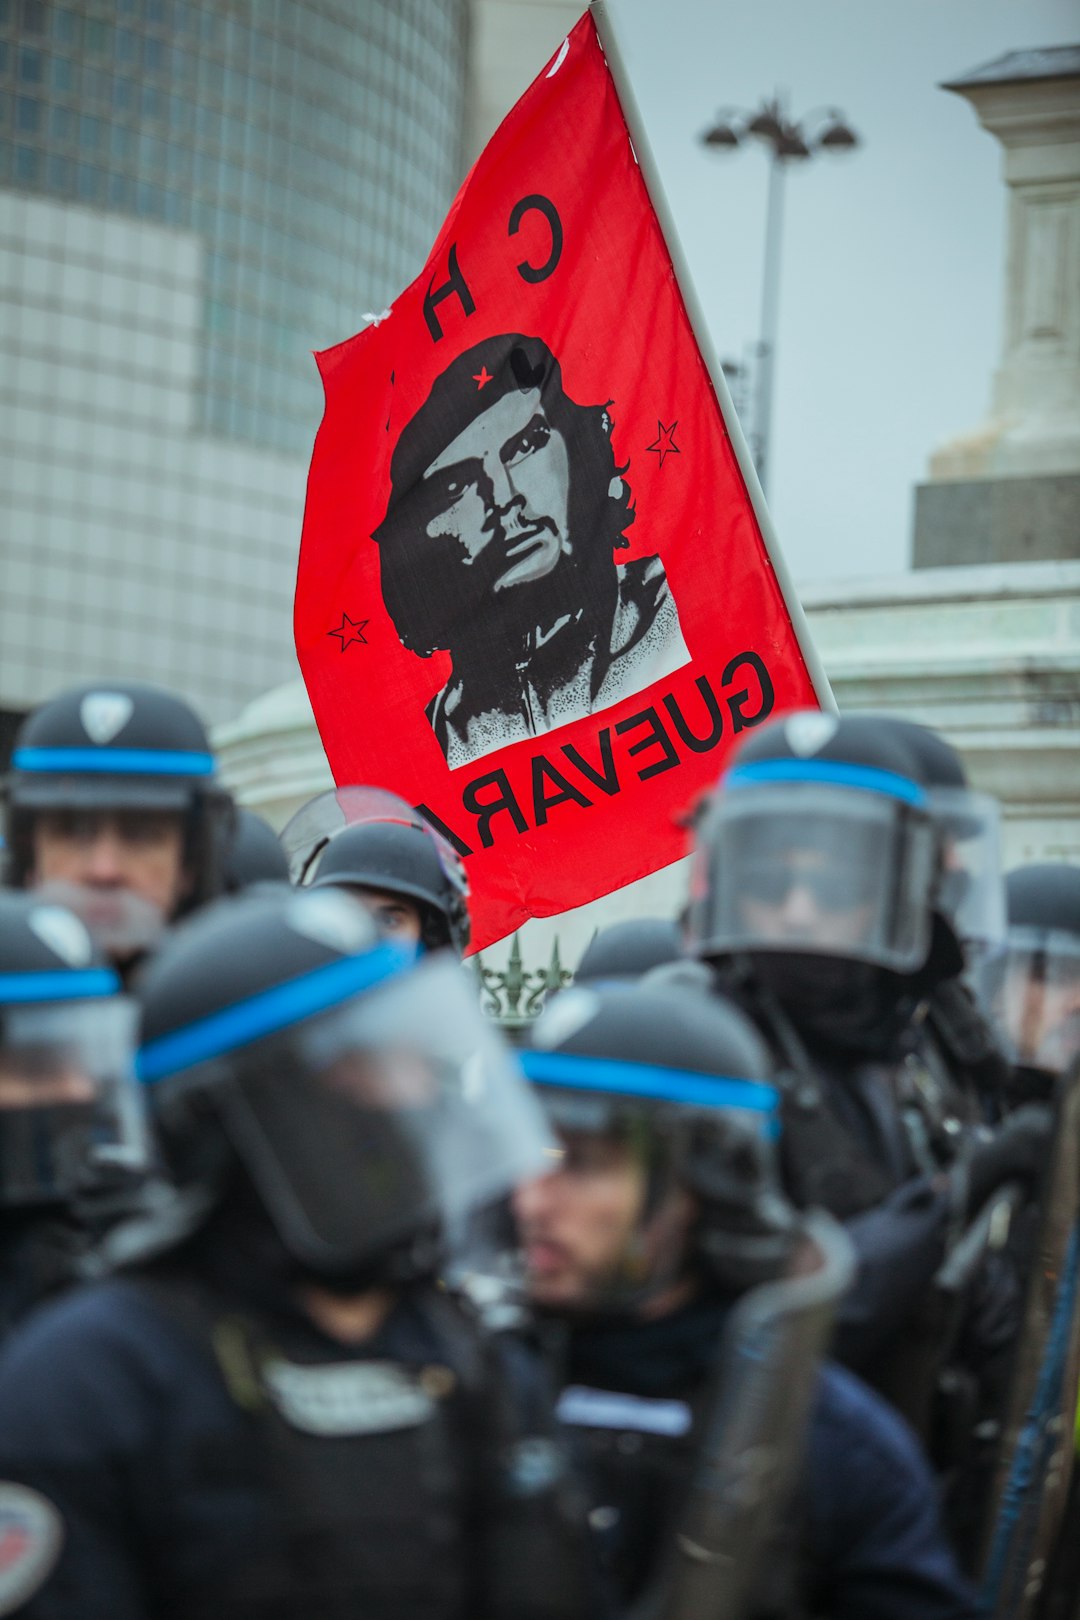 red Che Guevara flag near group of police during daytime